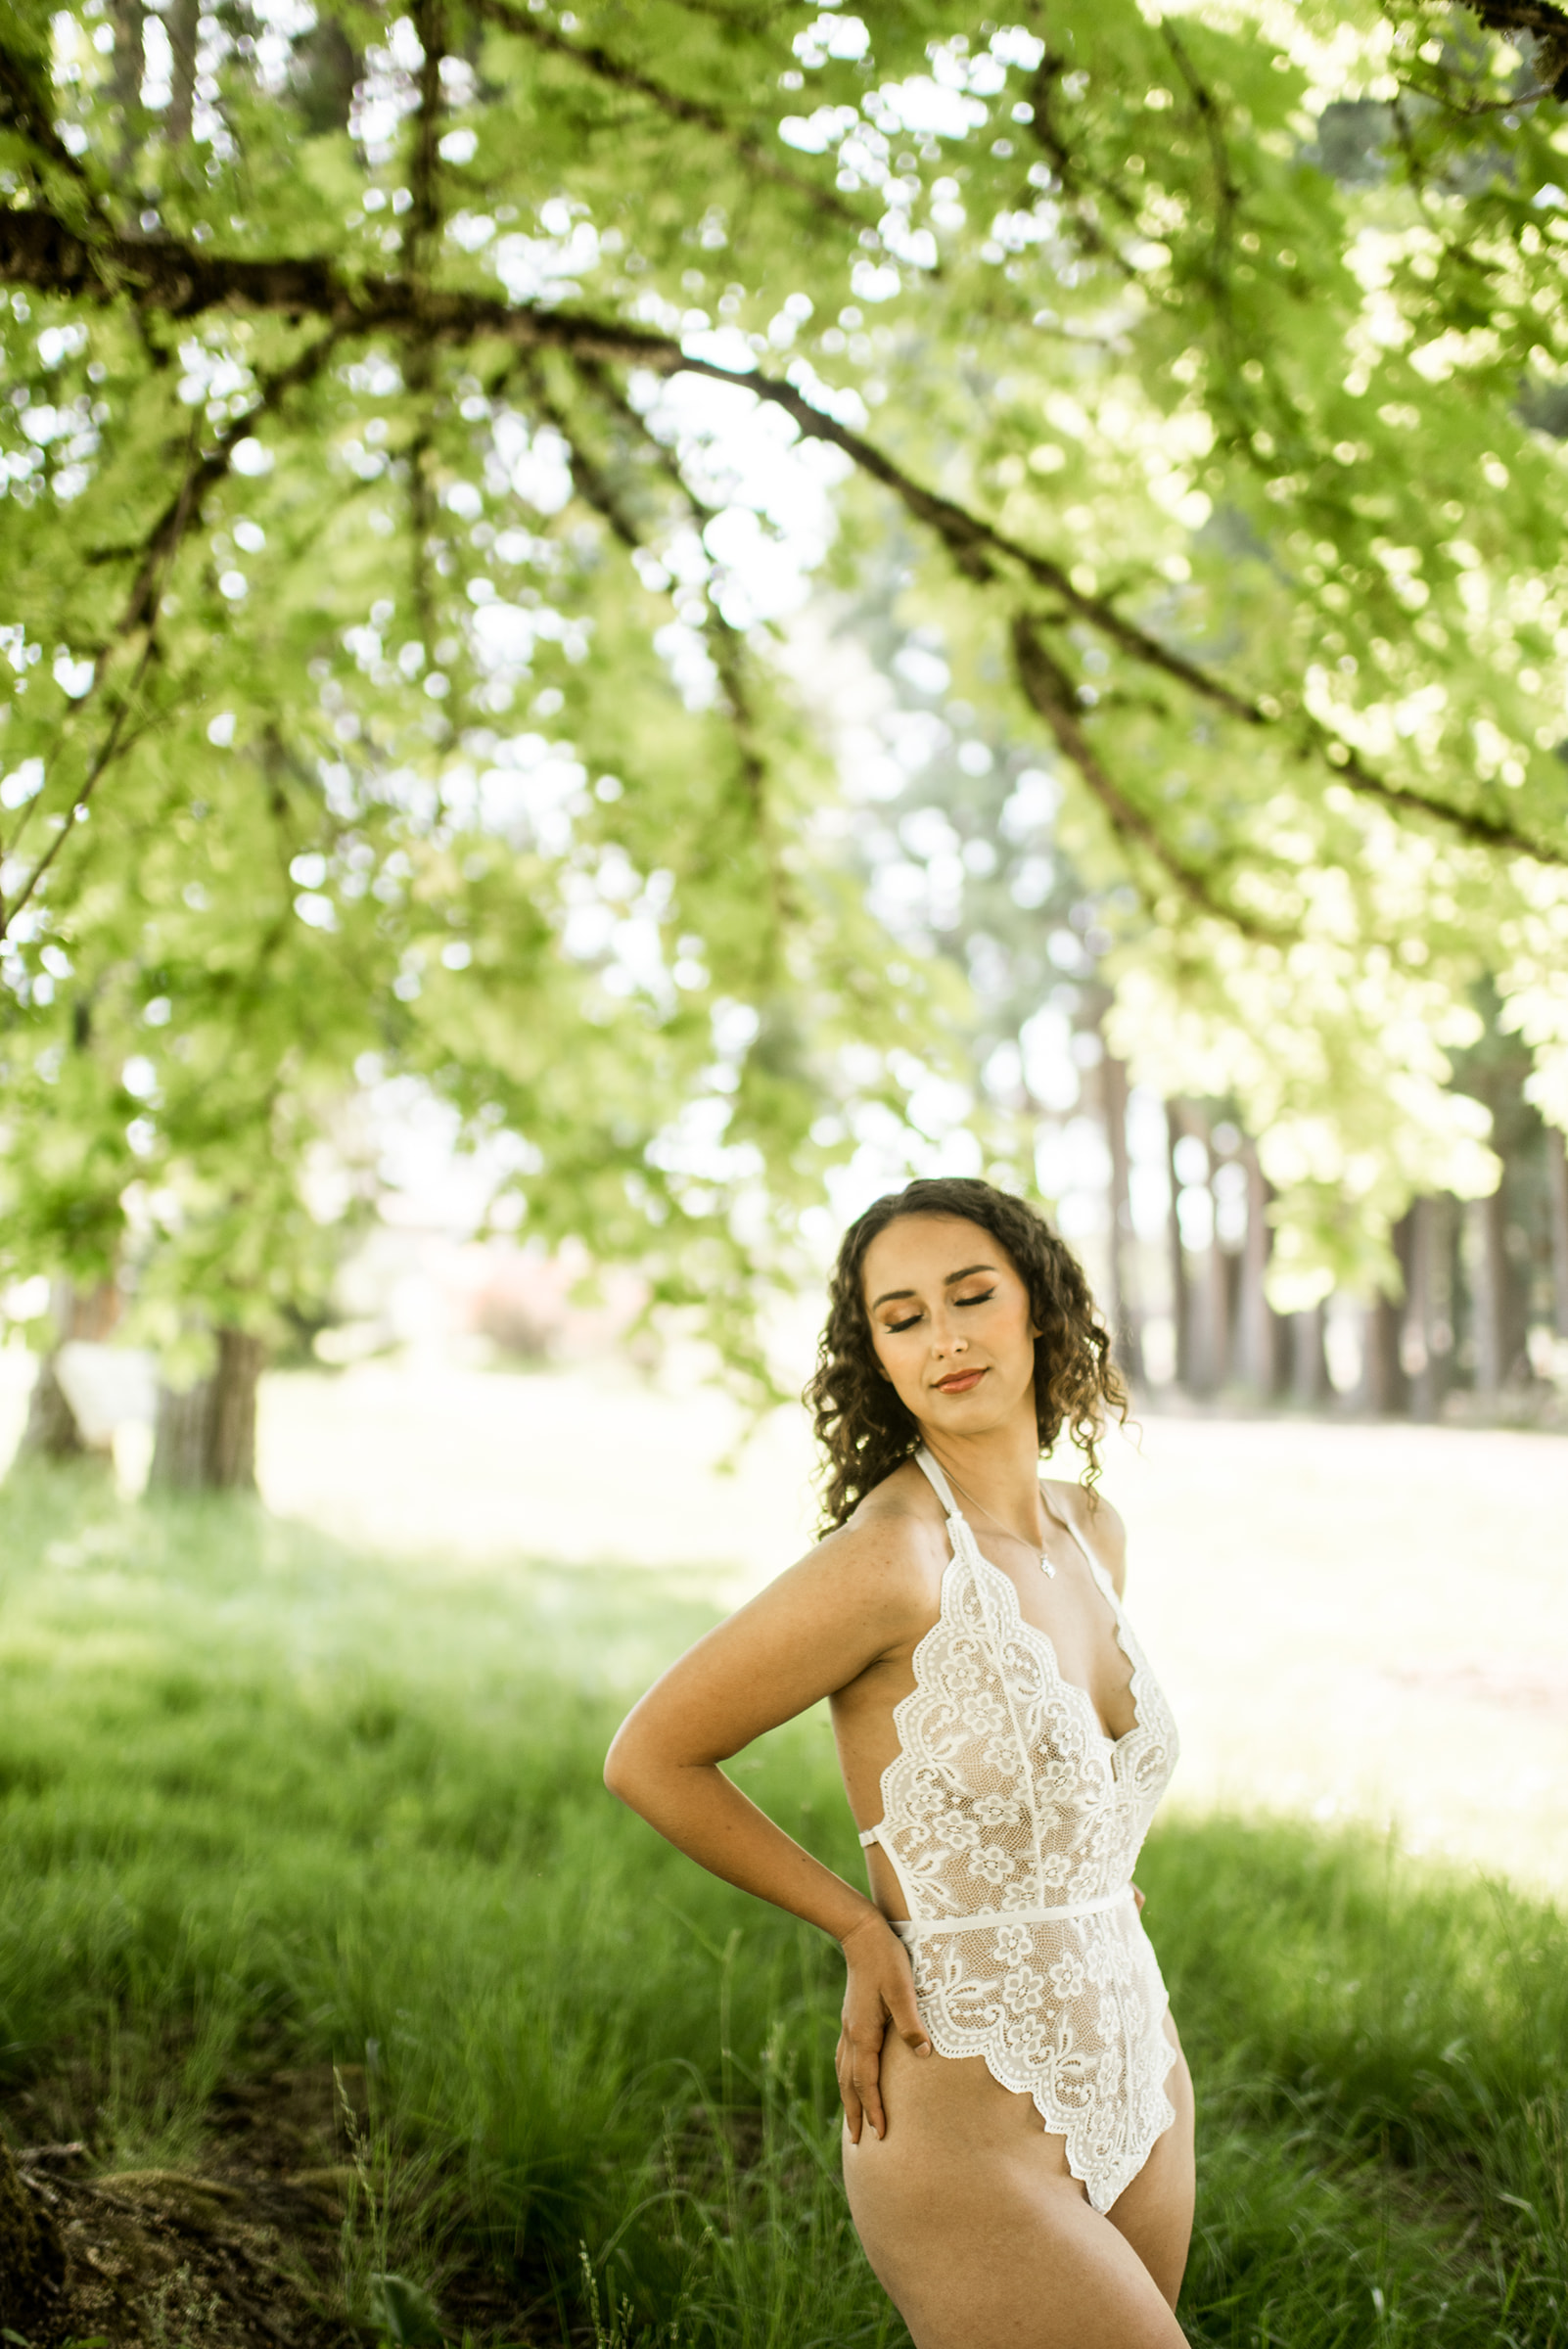 woman with curly hair poses underneath maple tree in lingerie for her boudoir session.